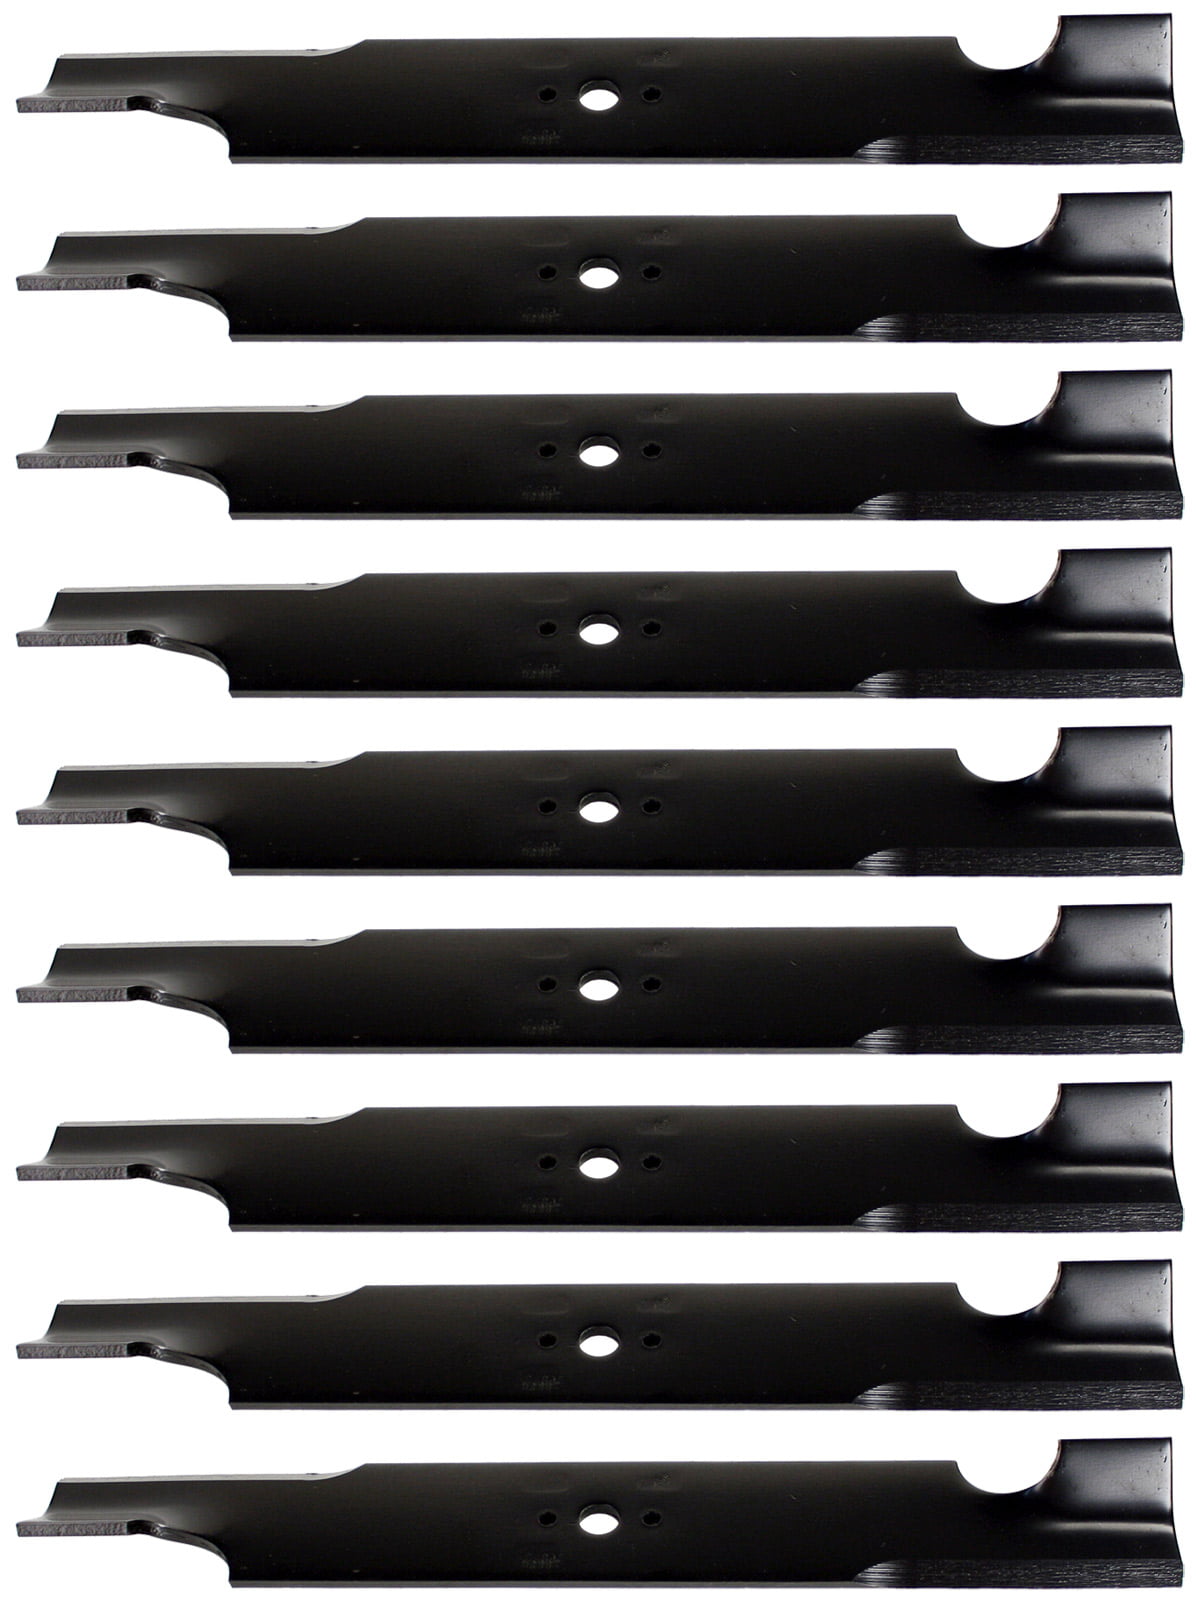 GDU10231 6 Details about   Six Notched Air-Lift Lawn Mower Blades For Great Dane 52" D18037 